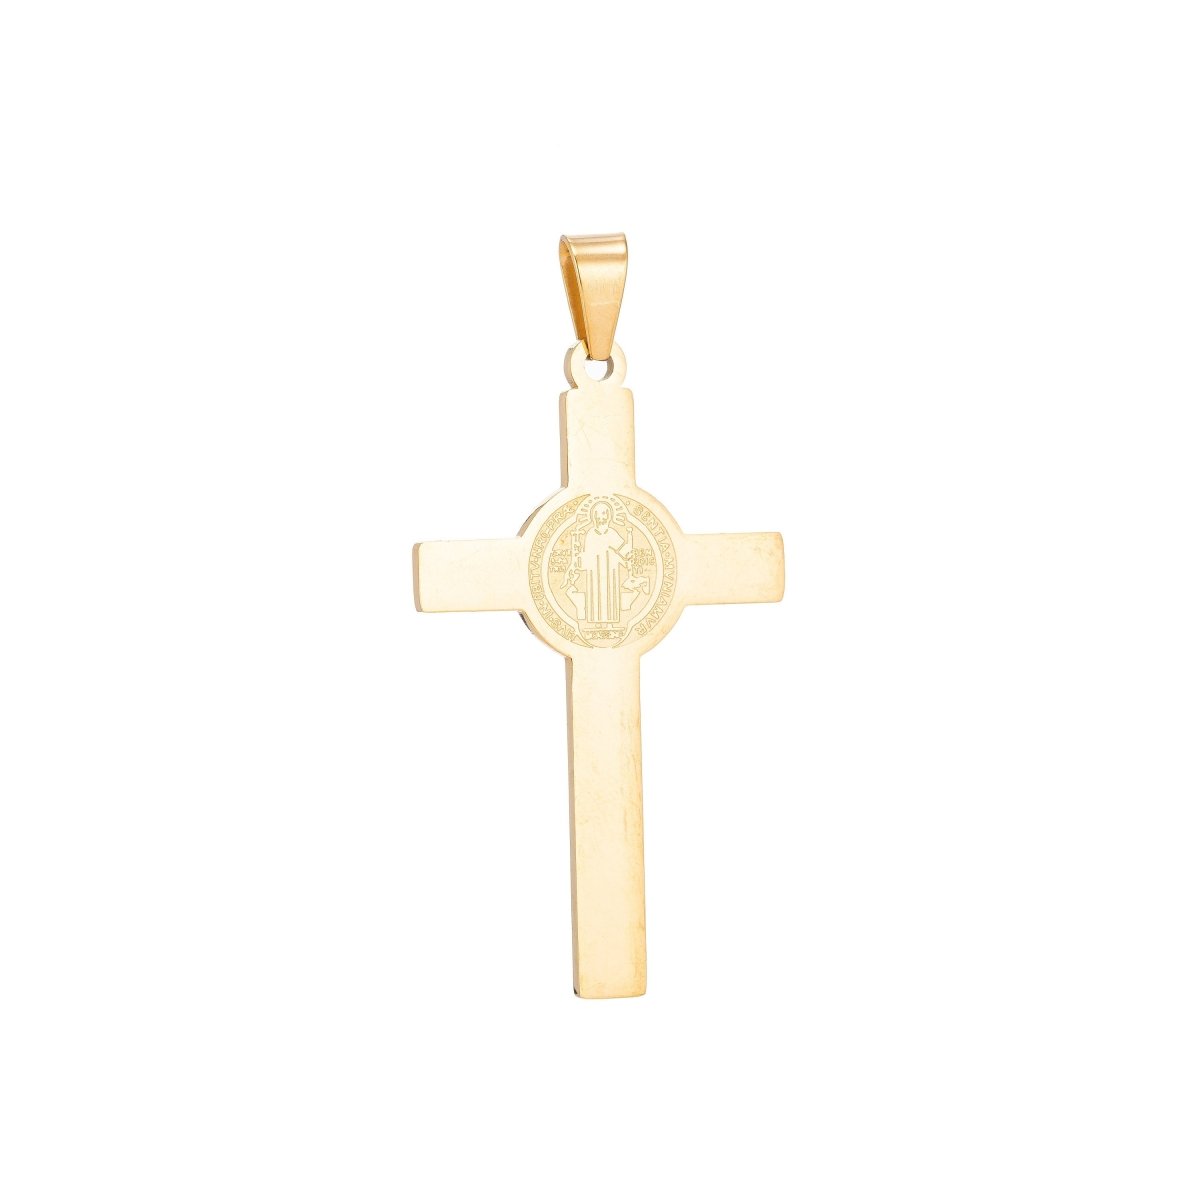 Gold Filled Saint Benedict Cross Pendant San Benito Saint Benedict Charm for Layered Necklace Religious Jewelry Making J-397 - DLUXCA